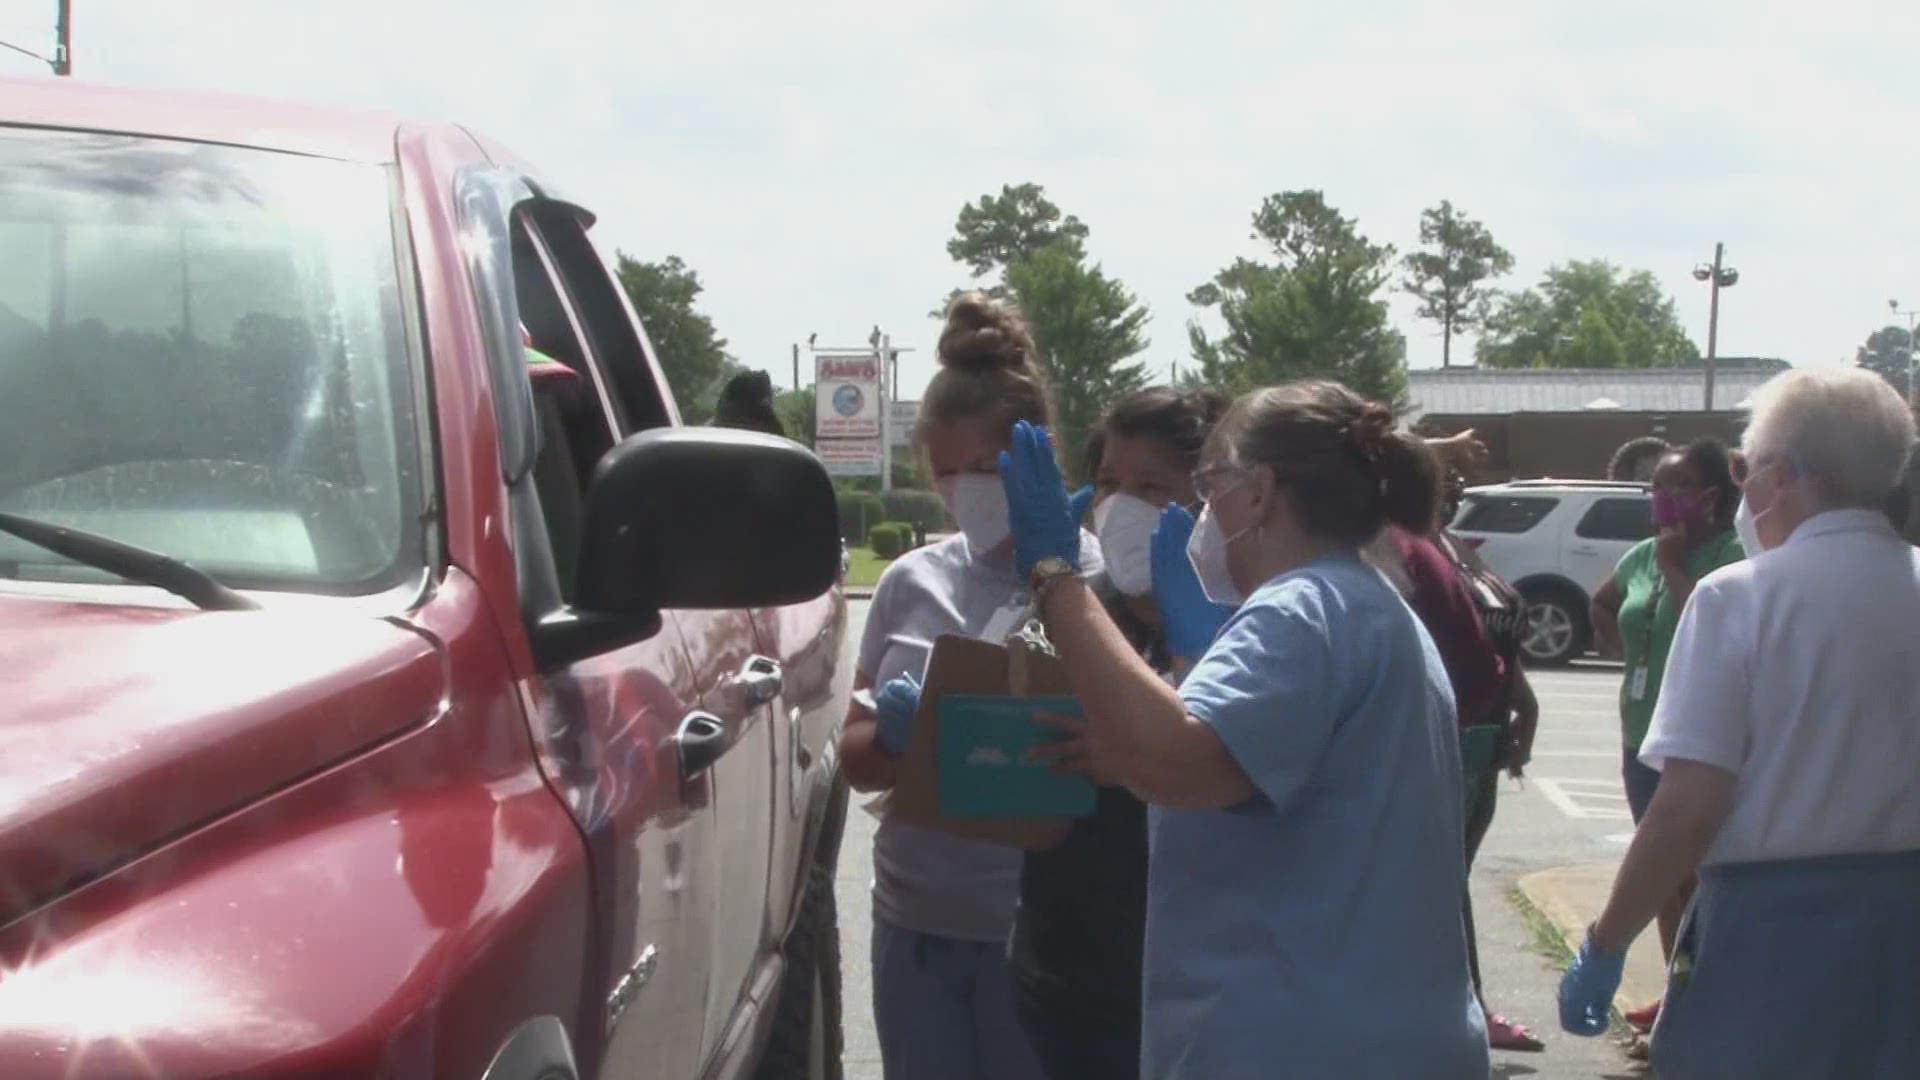 The Arkansas Department of Health set up a free COVID-19 testing site in southwest Little Rock Sunday.